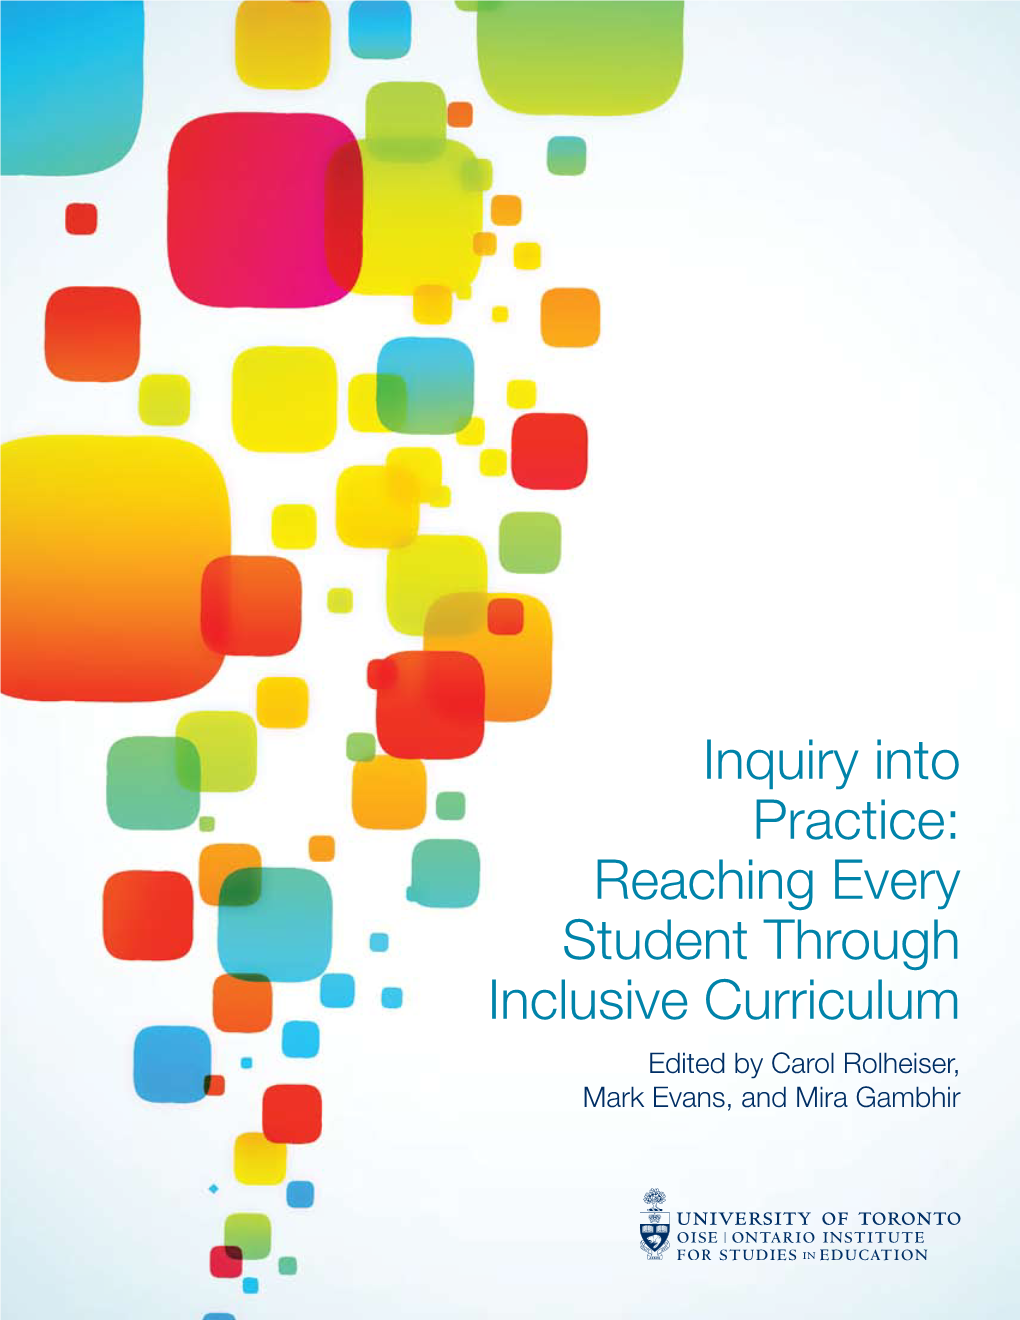 Inquiry Into Practice: Reaching Every Student Through Inclusive Curriculum Edited by Carol Rolheiser, Mark Evans, and Mira Gambhir